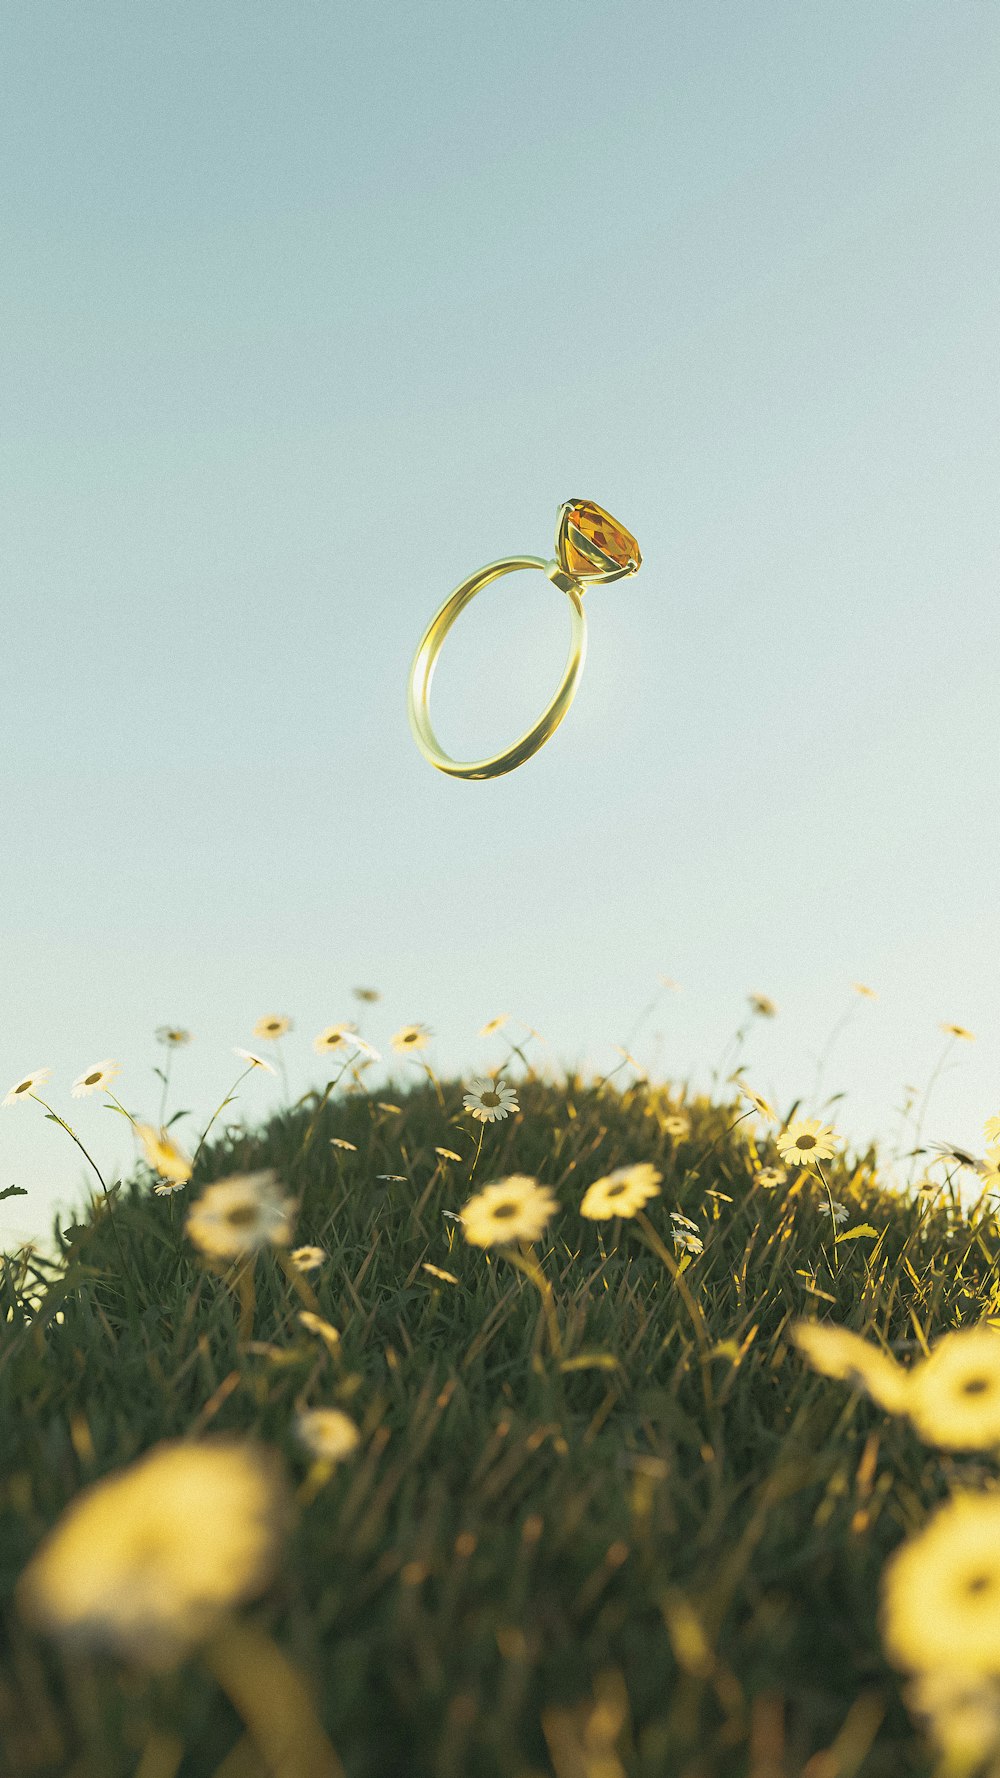 a ring flying through the air over a field of flowers